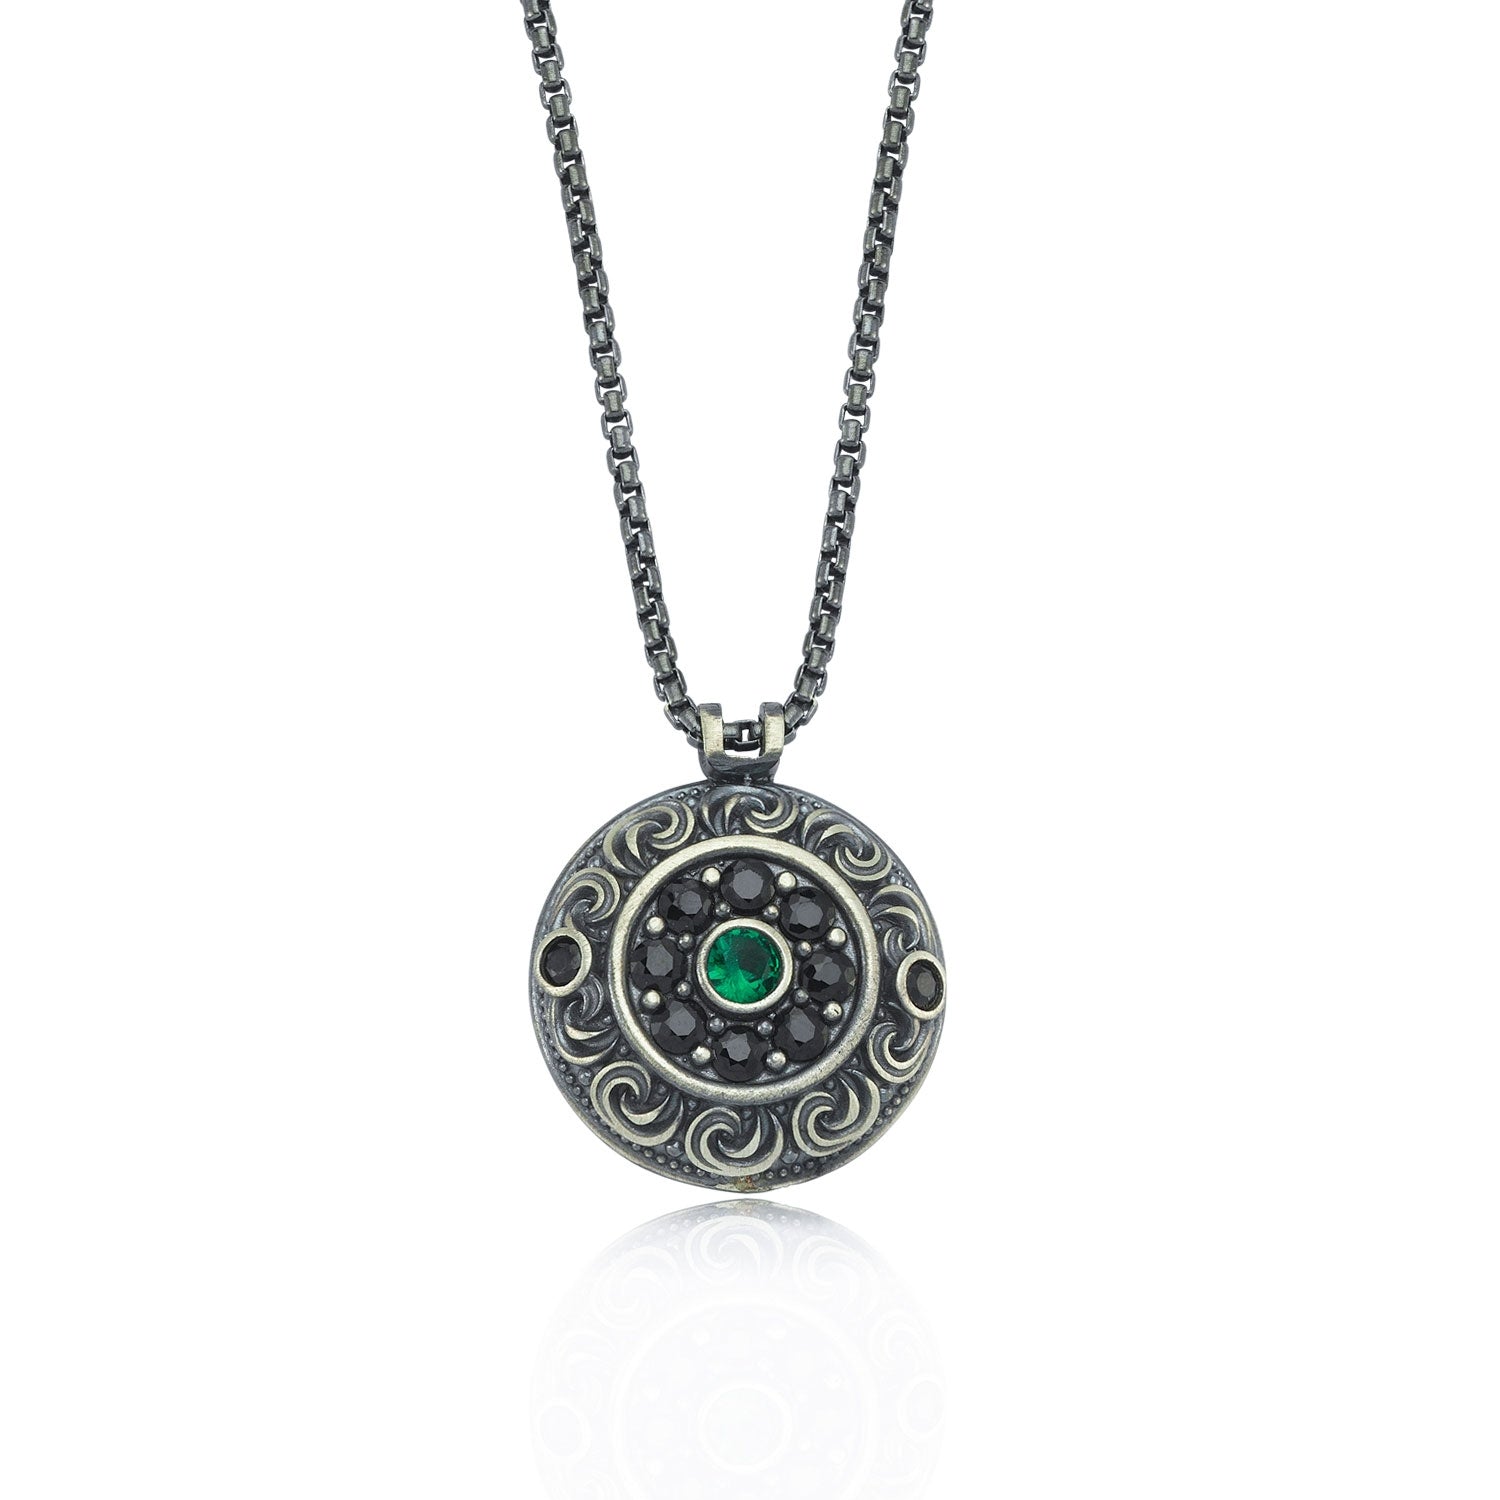 RARE PRINCE by CARAT SUTRA | Unique Designed Evil Eye Pendant for Men | 925 Sterling Silver Oxidized Pendant | Men's Jewelry | With Certificate of Authenticity and 925 Hallmark - caratsutra